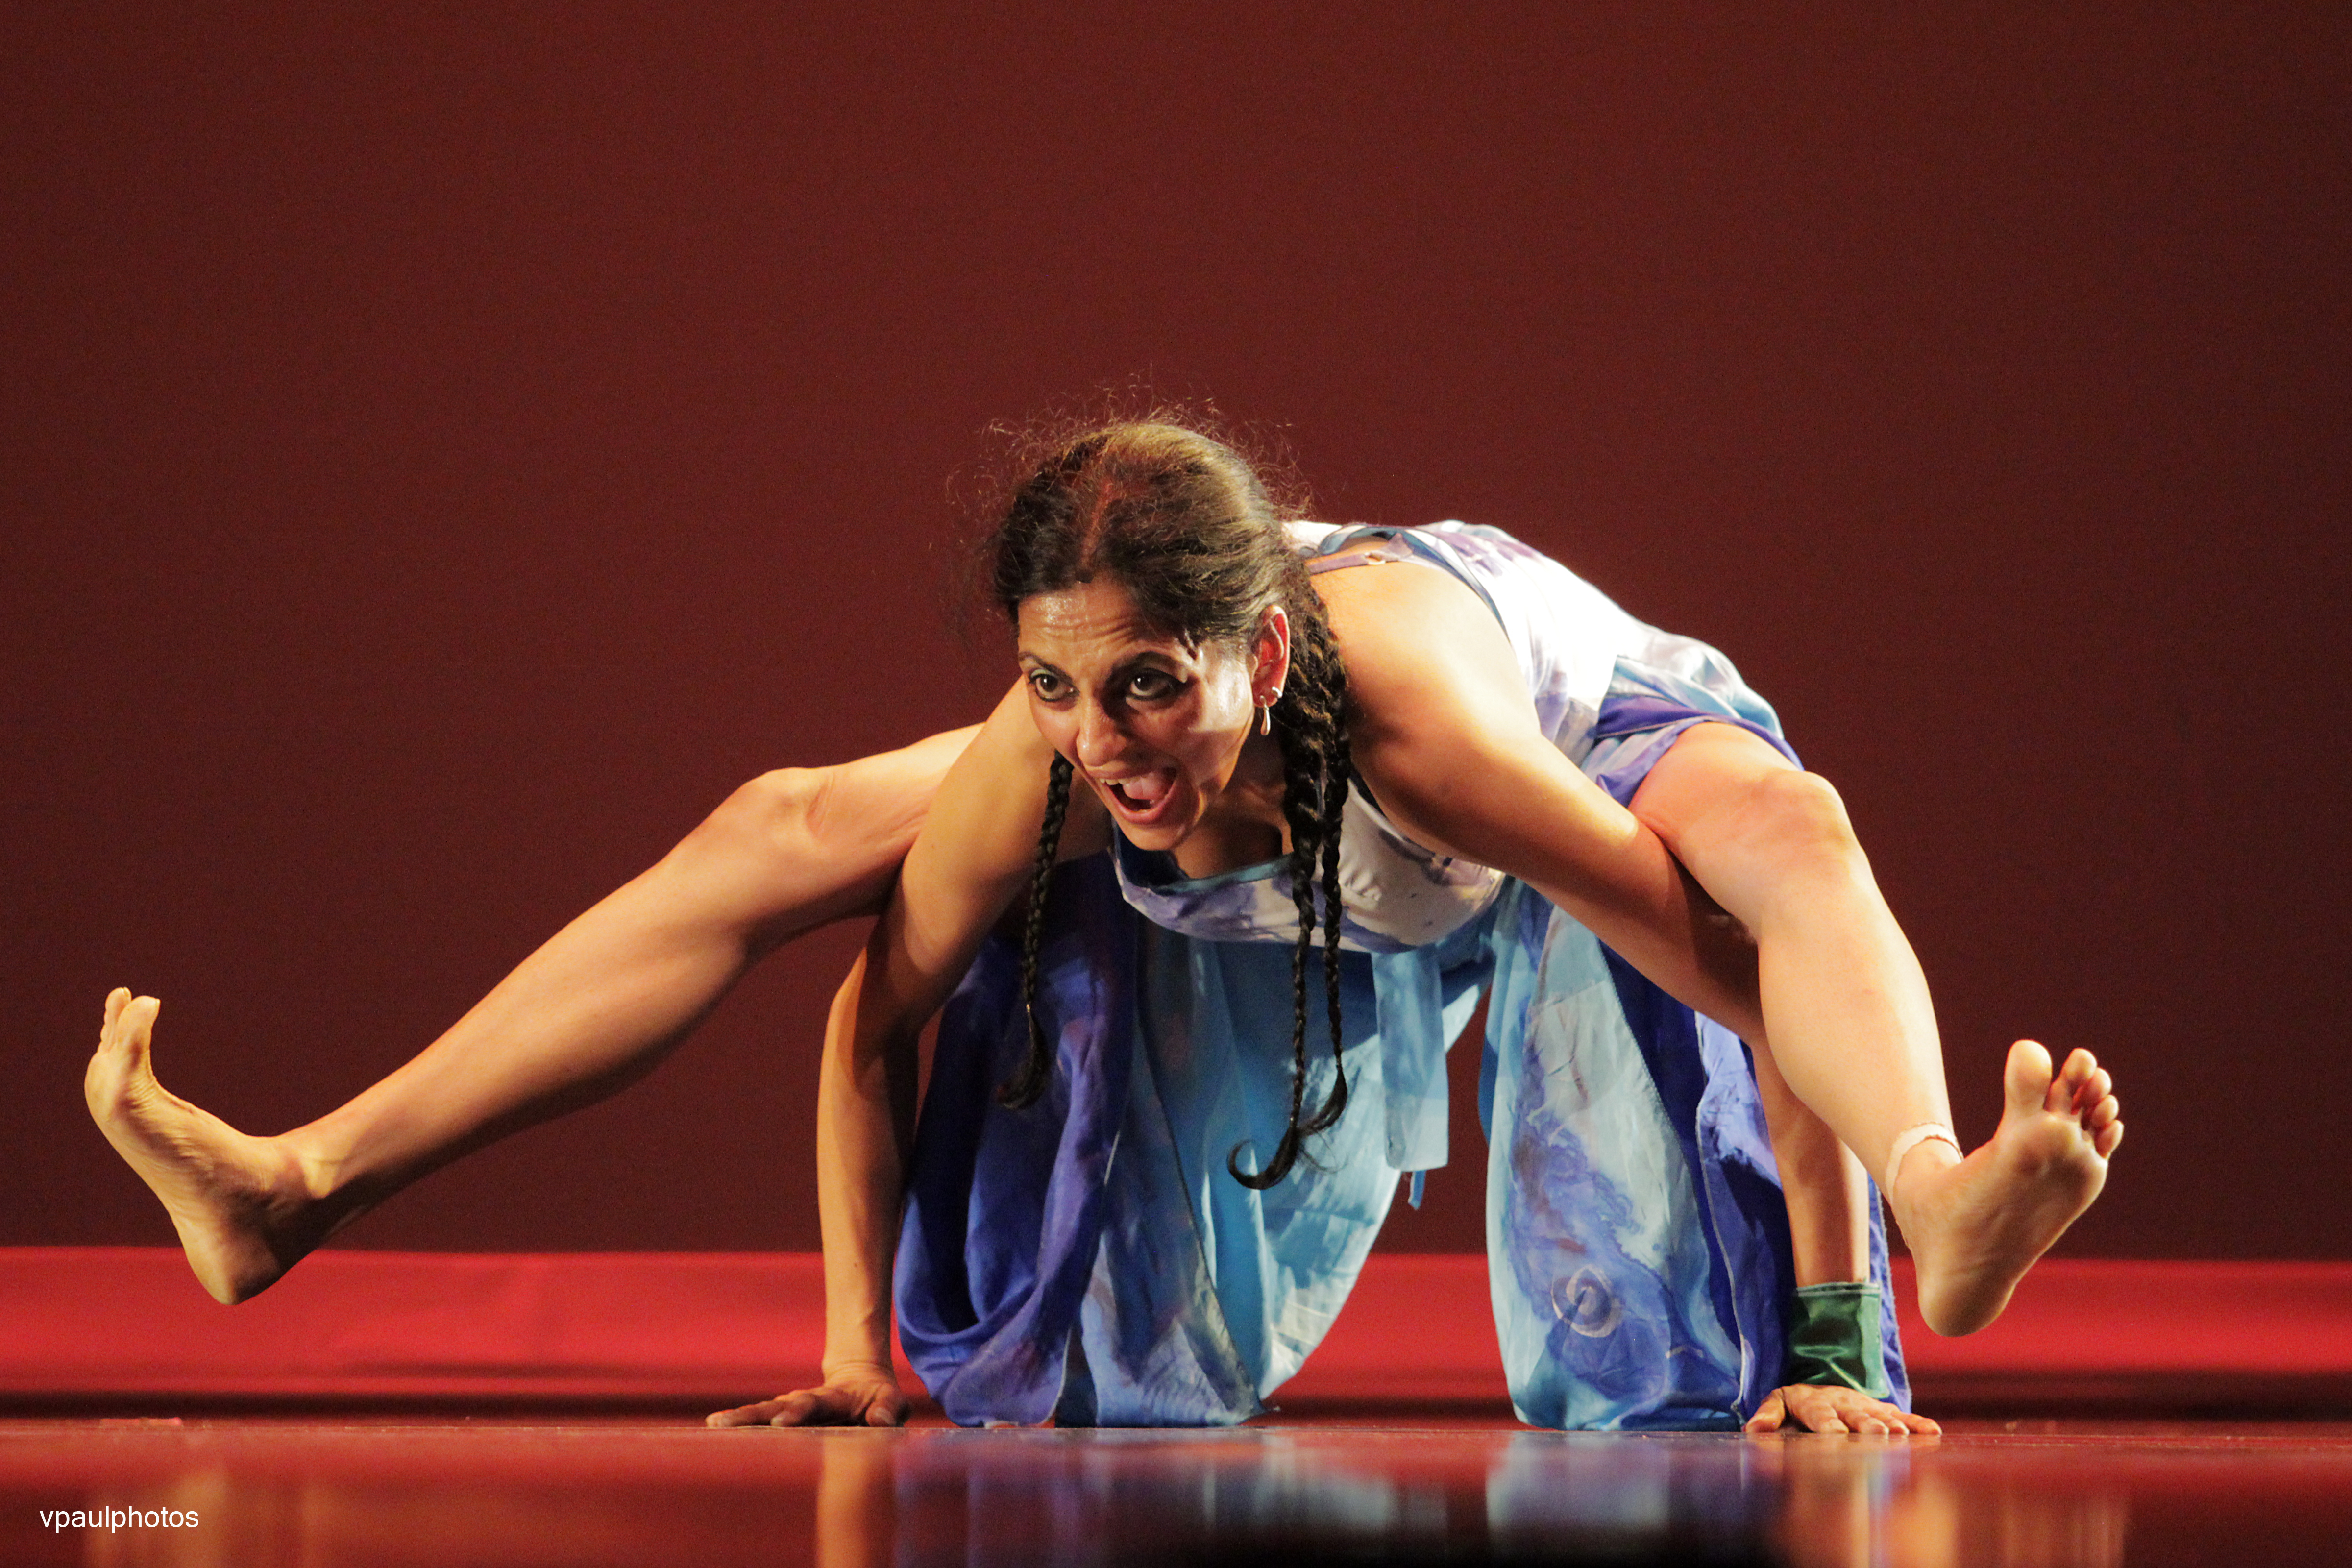 Female dancer, on stage, balancing her body on her hands with a angry face.